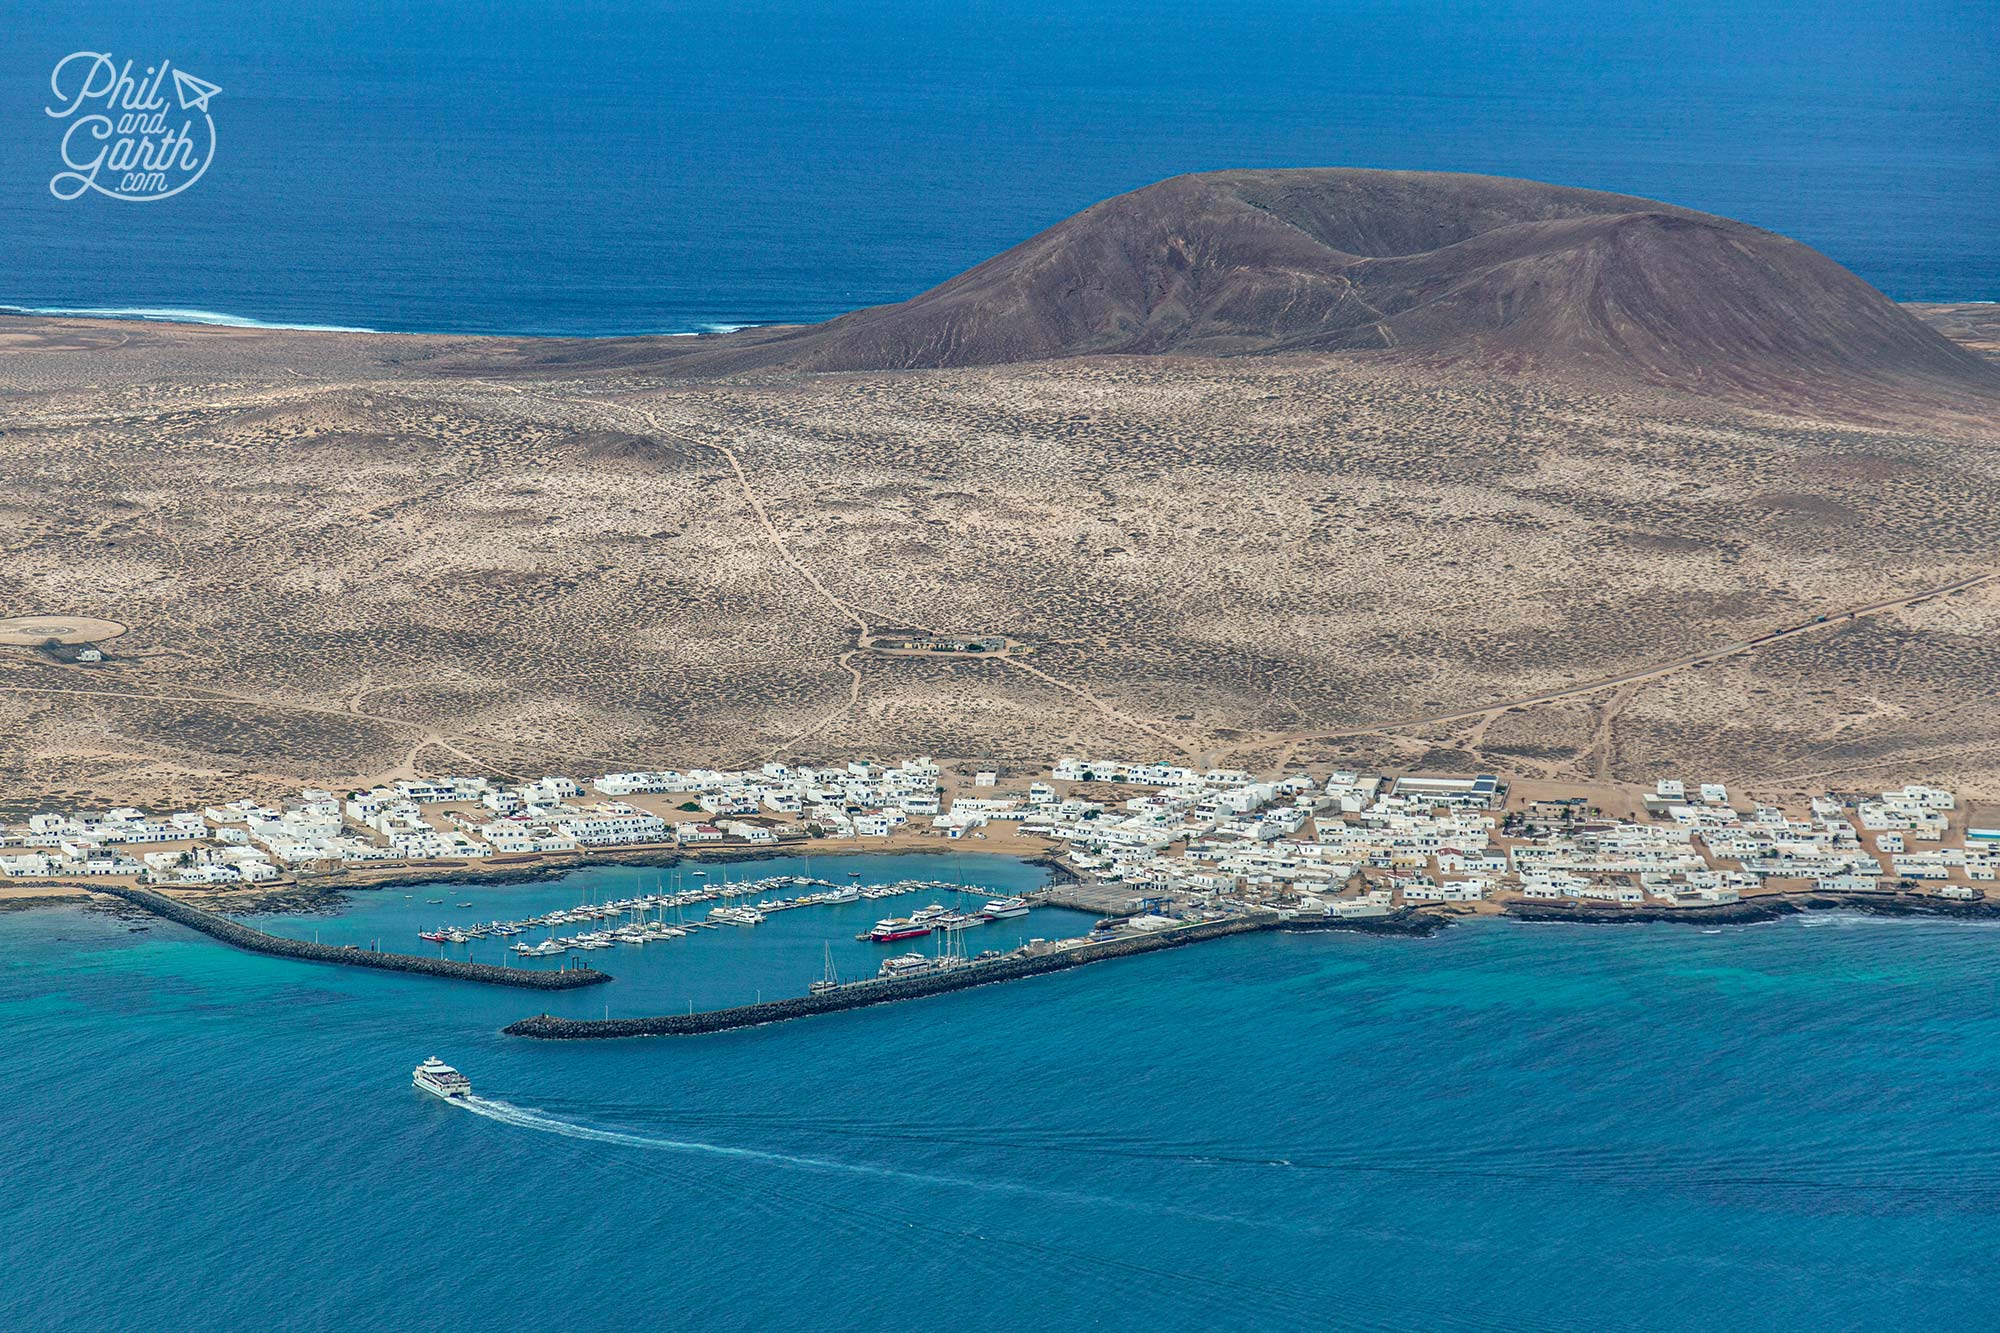 You can get a ferry from Lanzarote to La Graciosa - there are no tarmac roads on the island